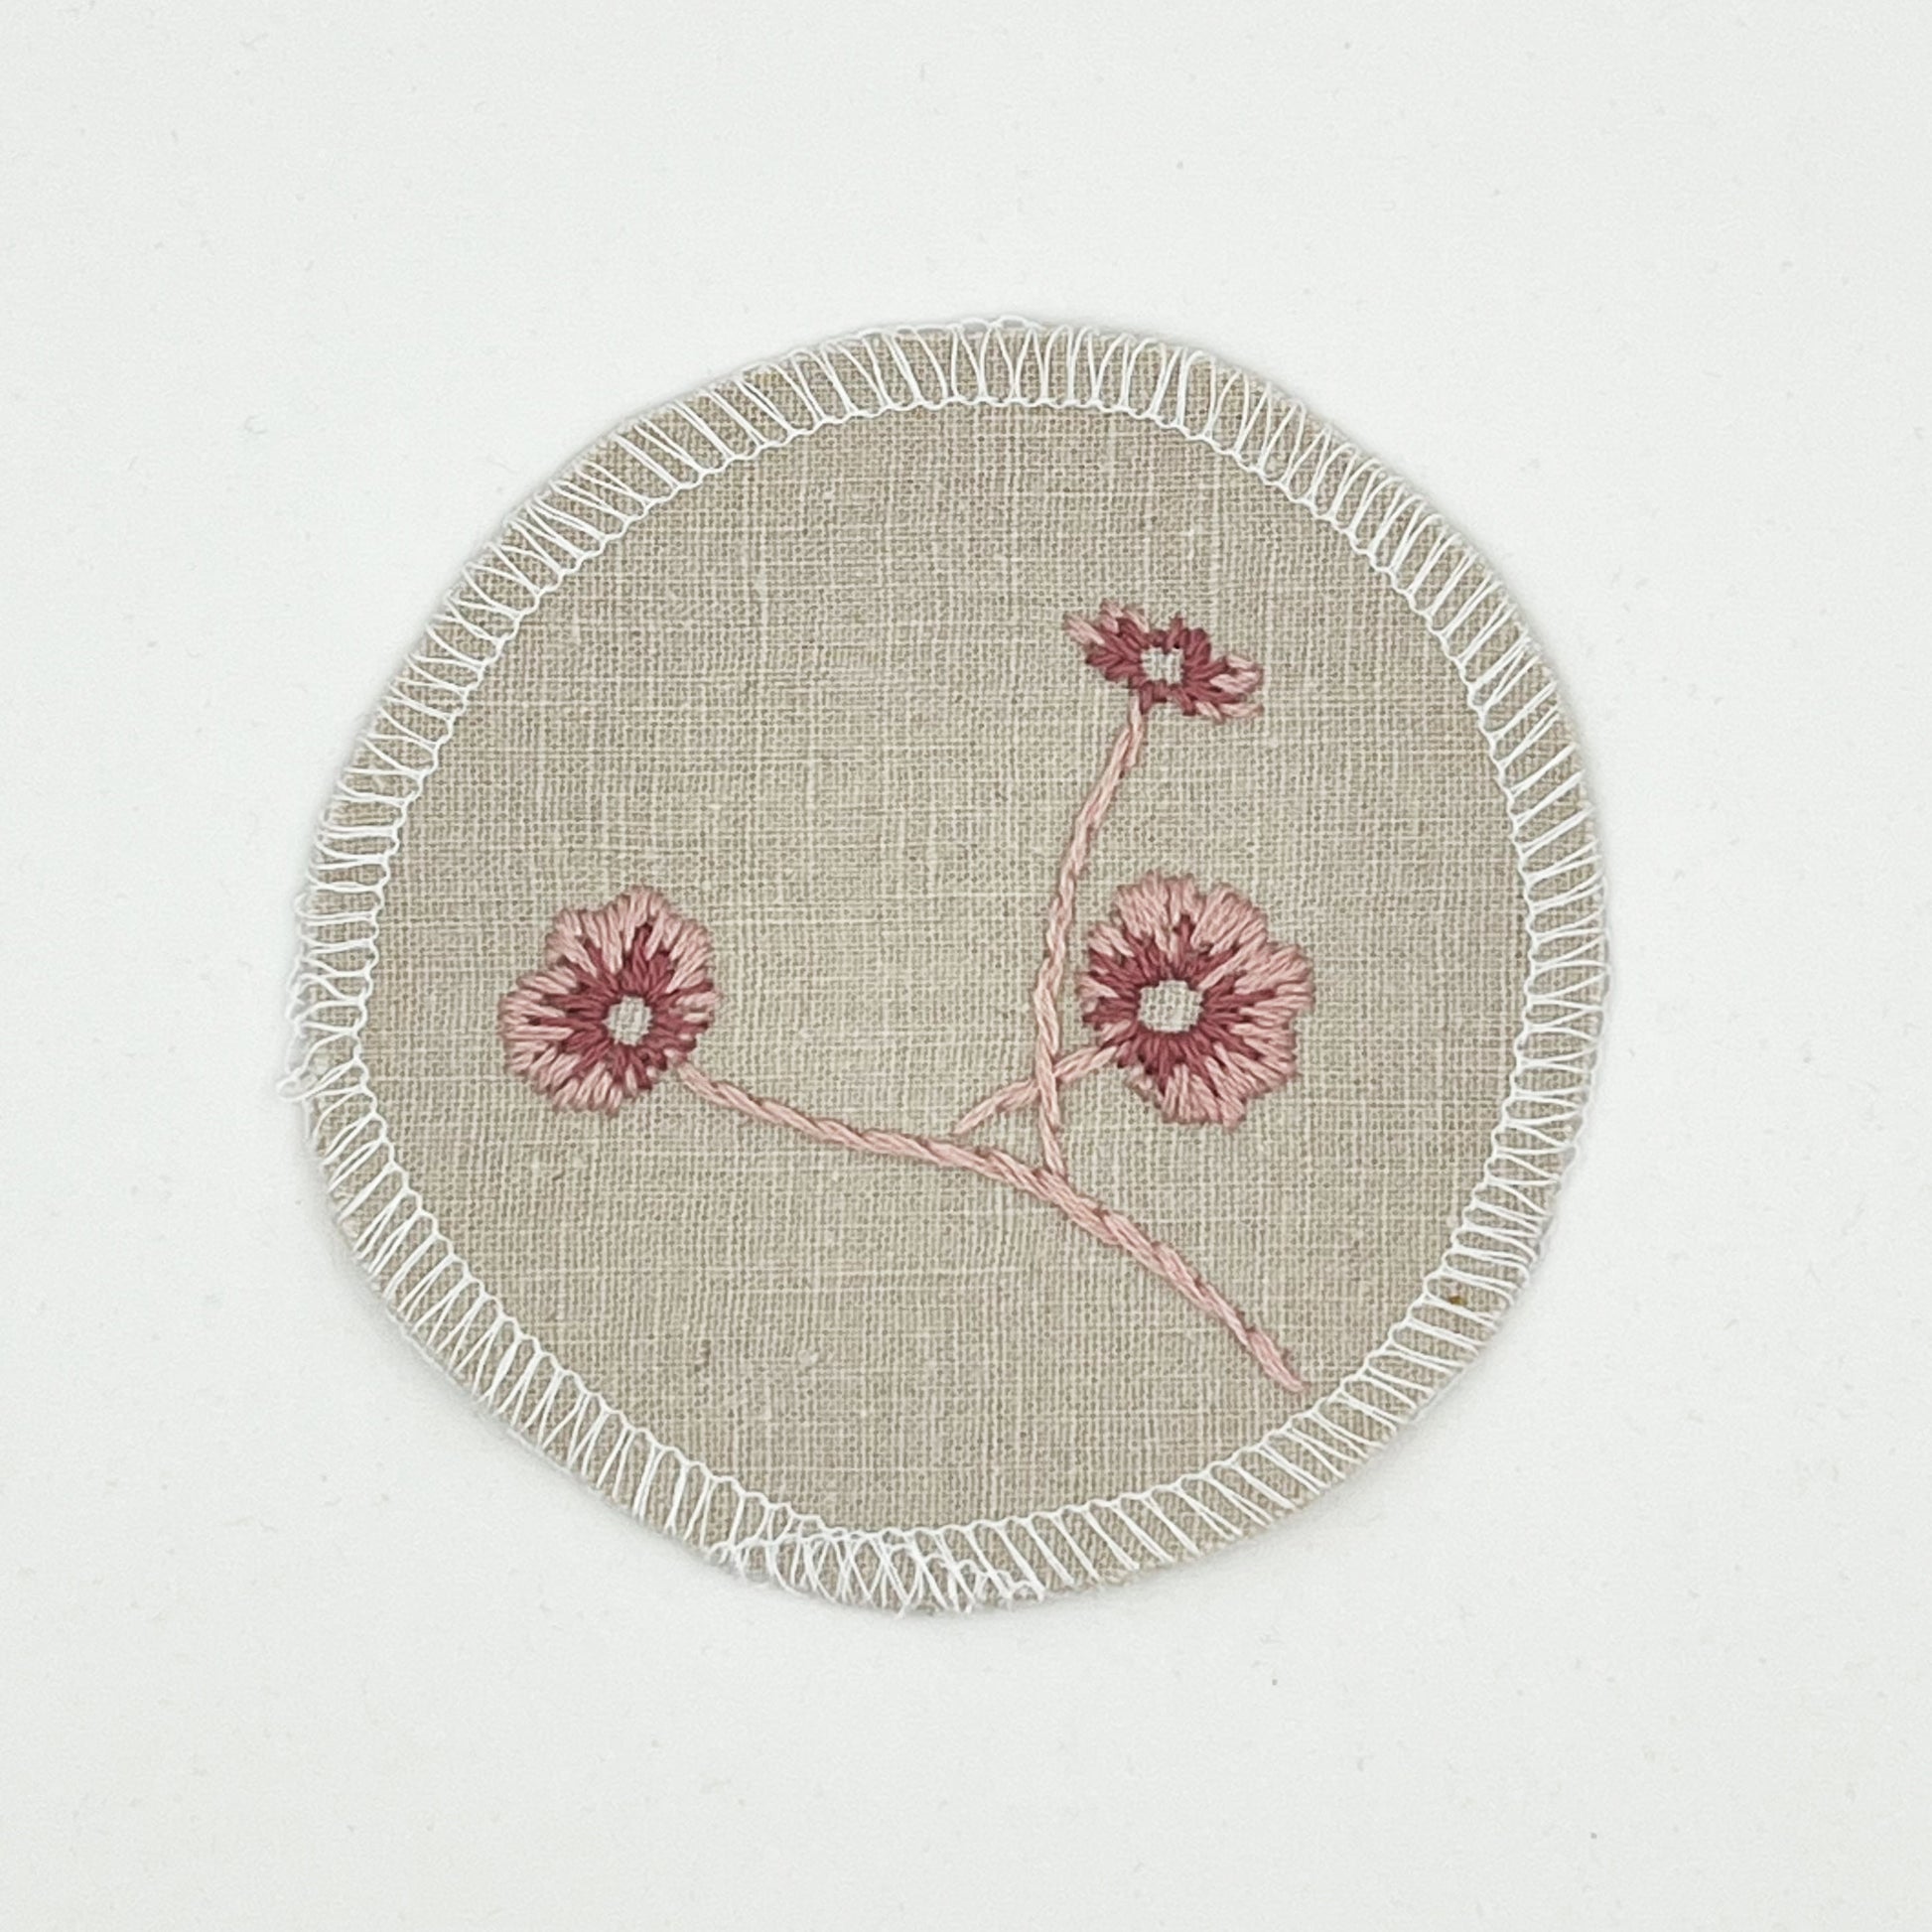 a circle shaped patch made from a natural color linen fabric, hand embroidered with 3 poppies in shades of pink, edges overlocked with white thread, on a white background